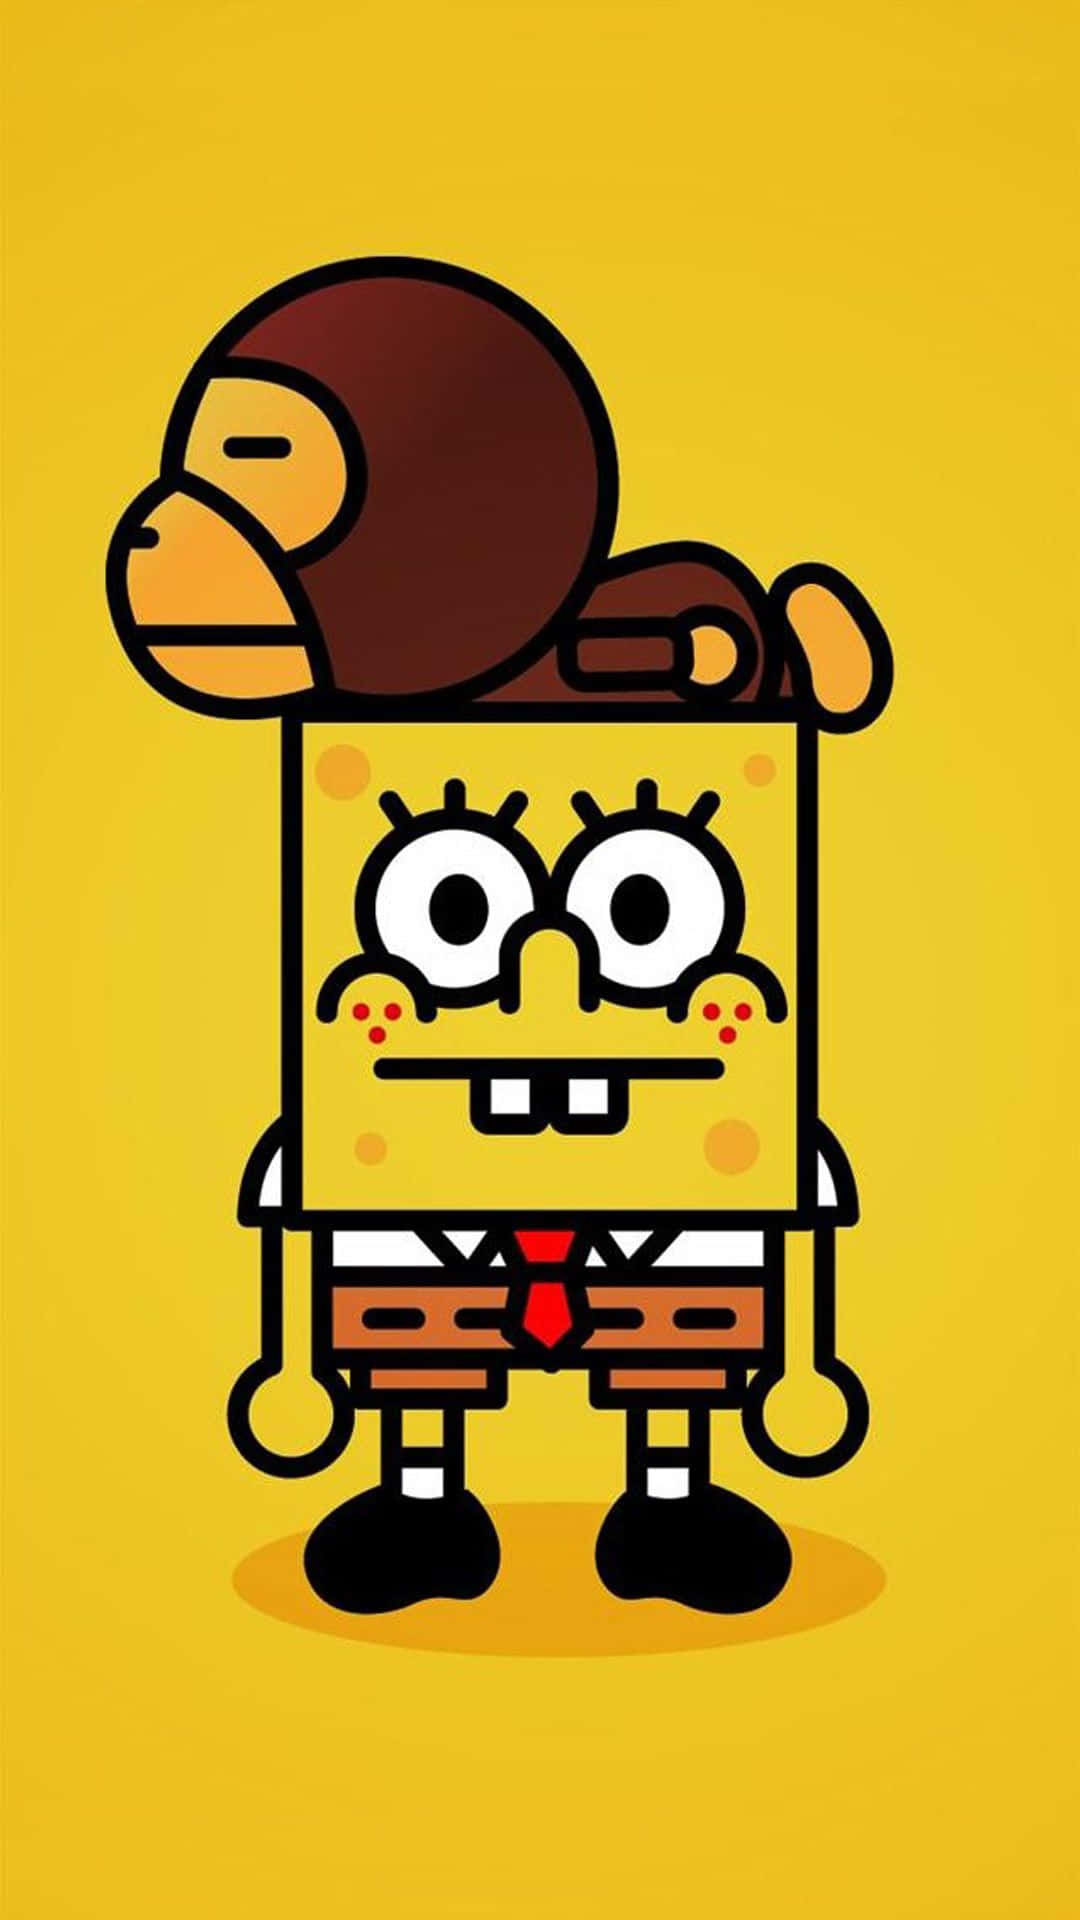 Check Out This Quirky Cartoon Iphone! Wallpaper